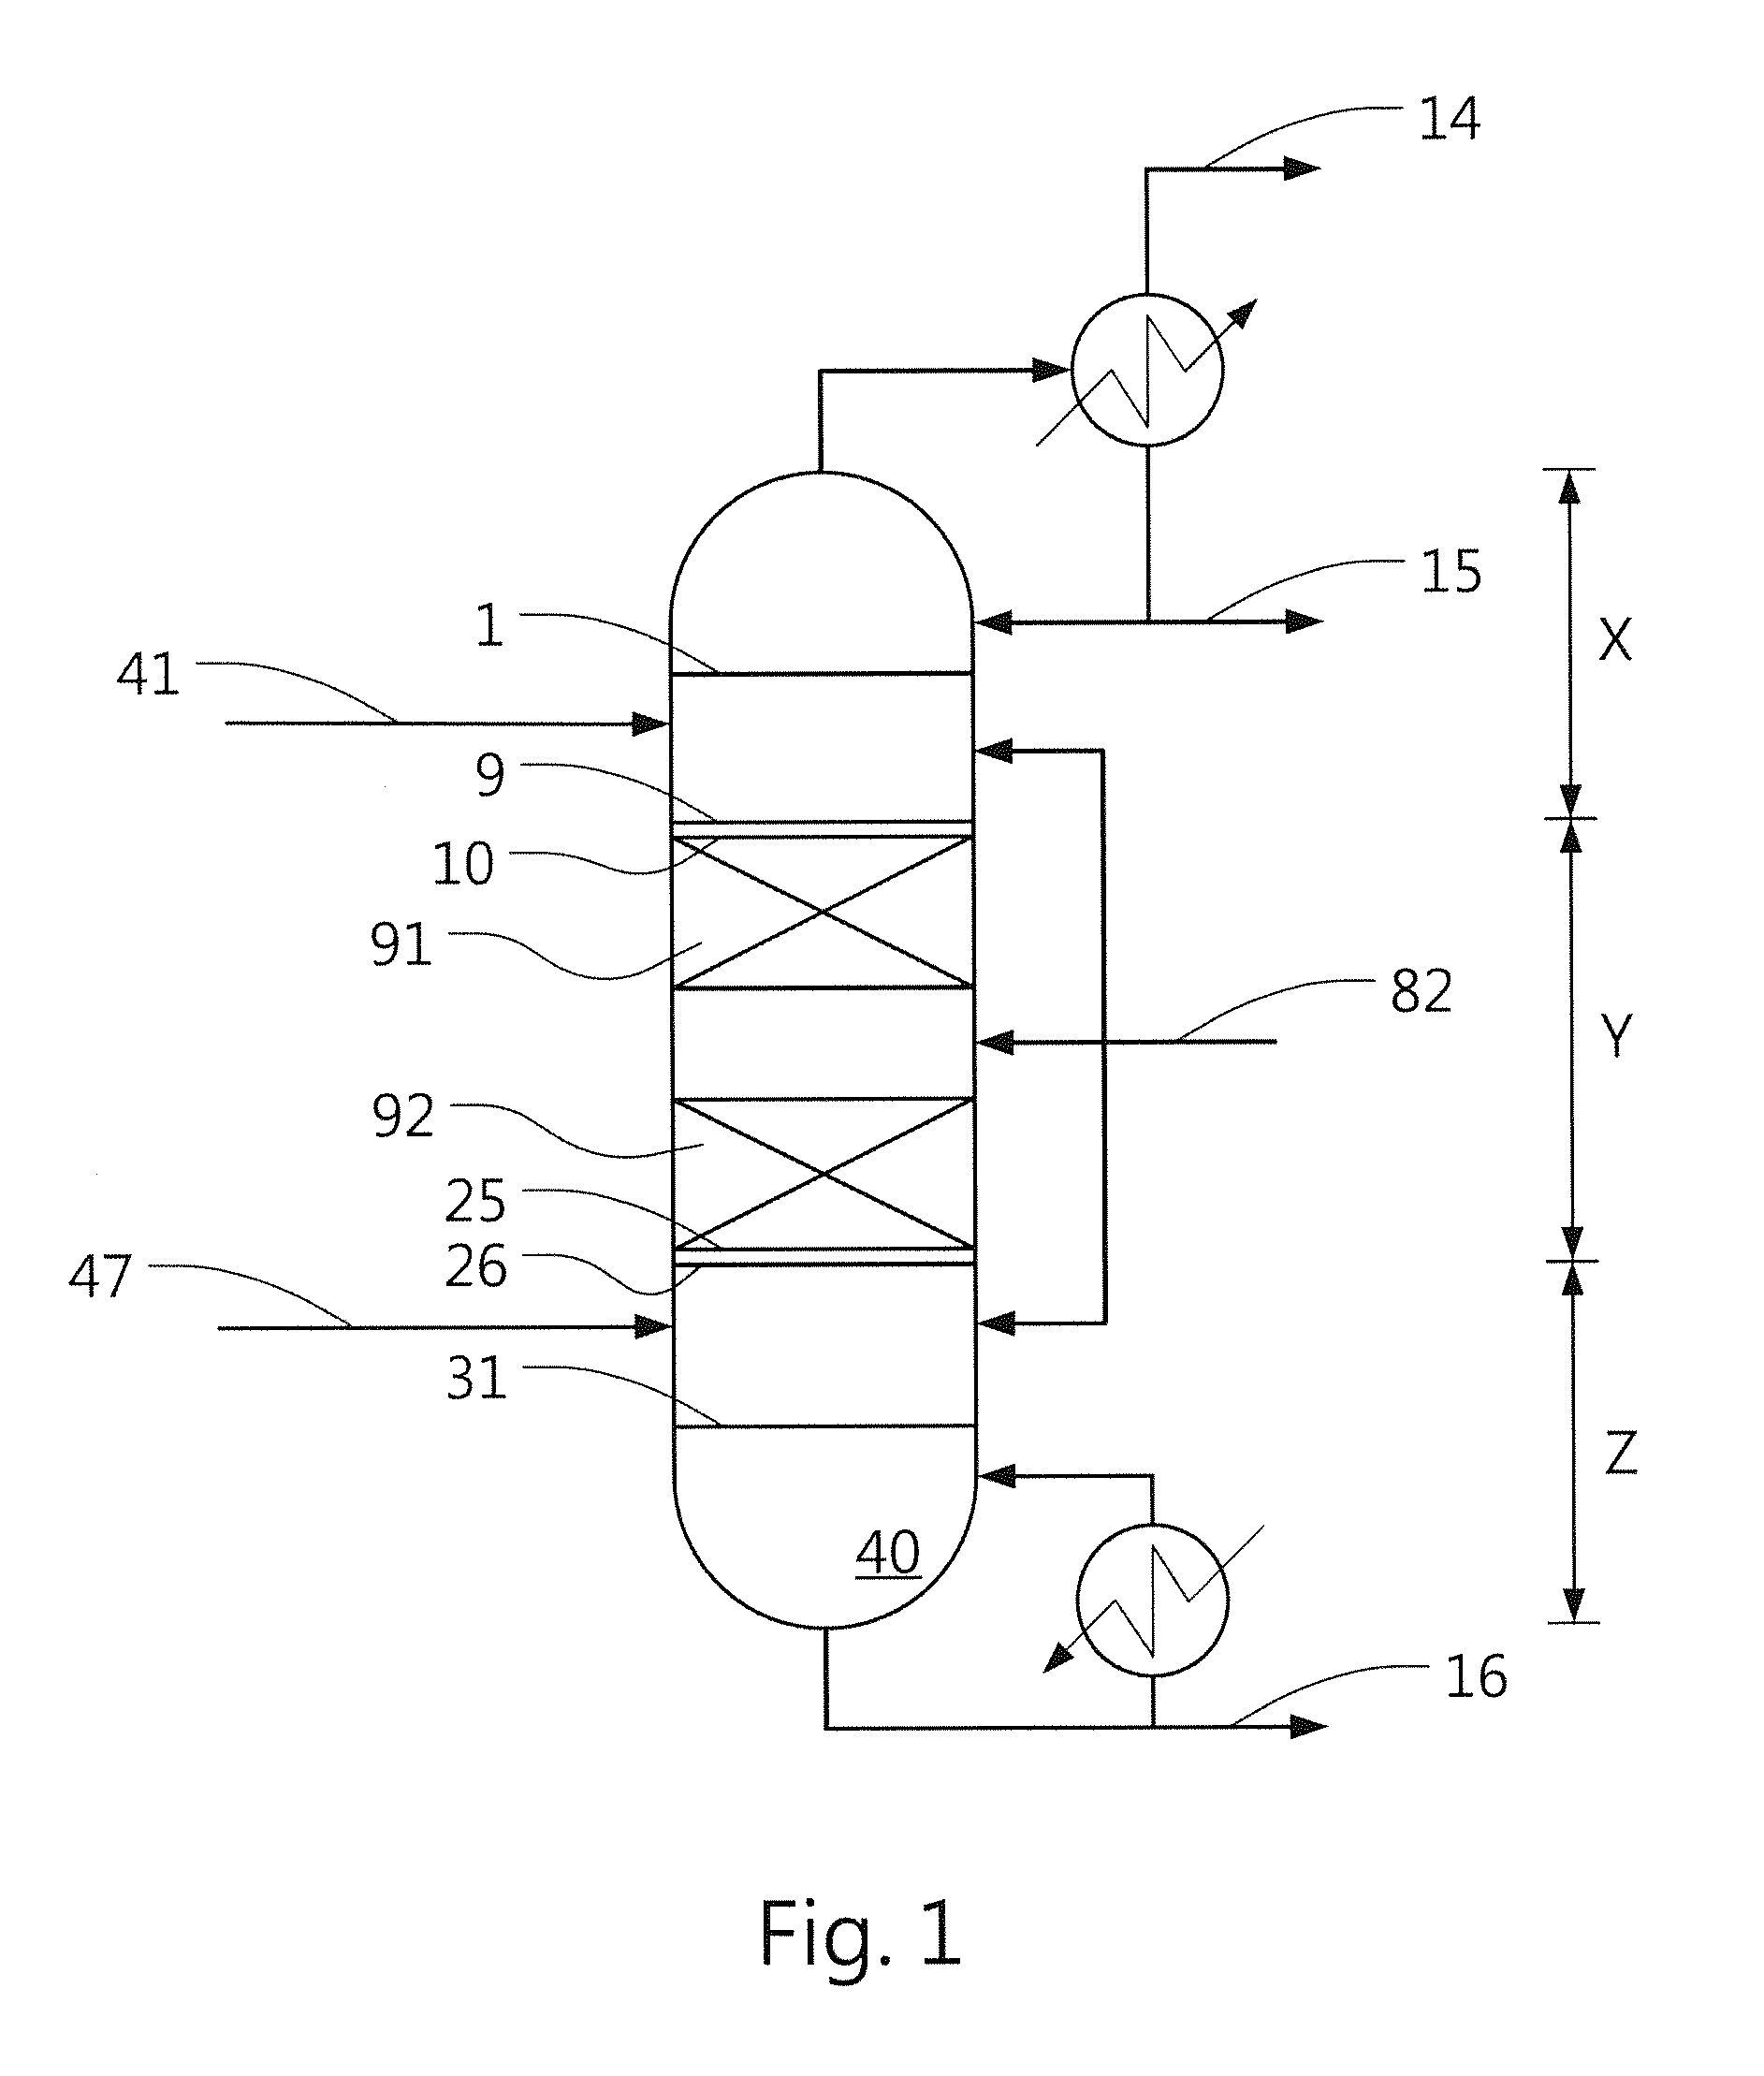 Method for coproducing isobutene and mtbe from tert-butanol mixture in a catalytic distillation column